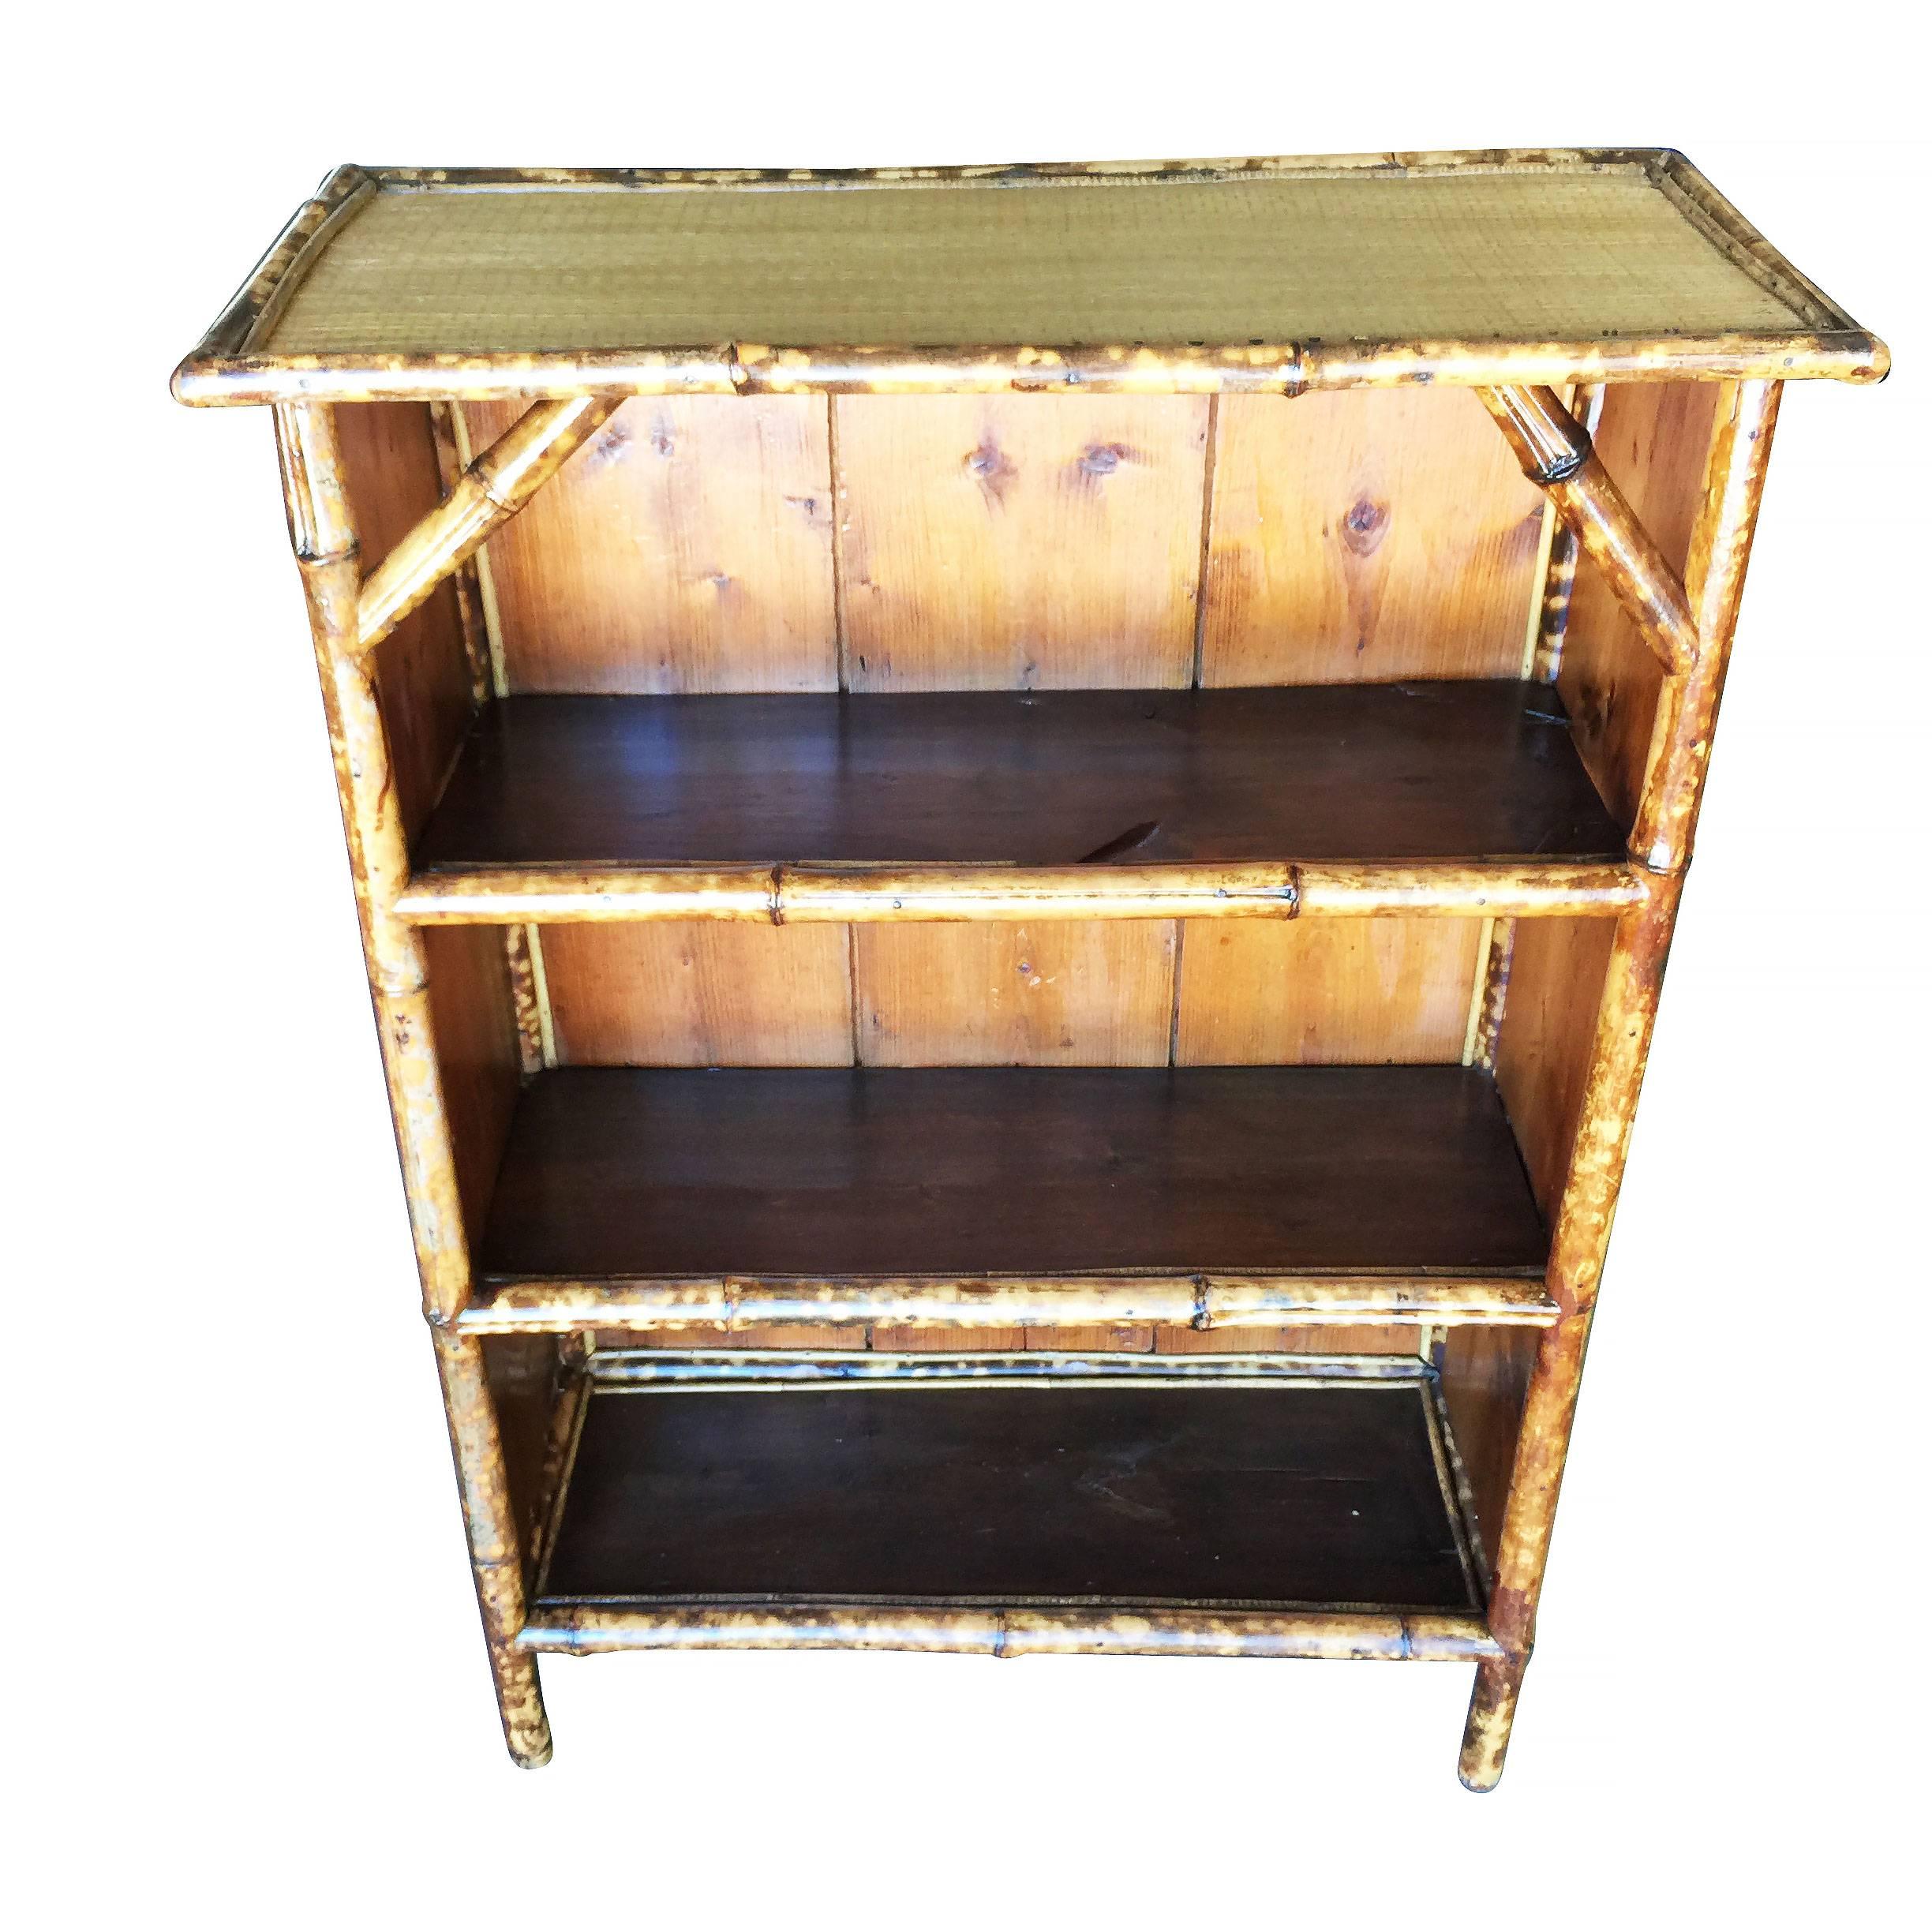 Antique four-level tiger bamboo shelf with hand weaved rice coverings and wood shelving.


Restored to new for you.

All rattan, bamboo and wicker furniture has been painstakingly refurbished to the highest standards with the best materials. All